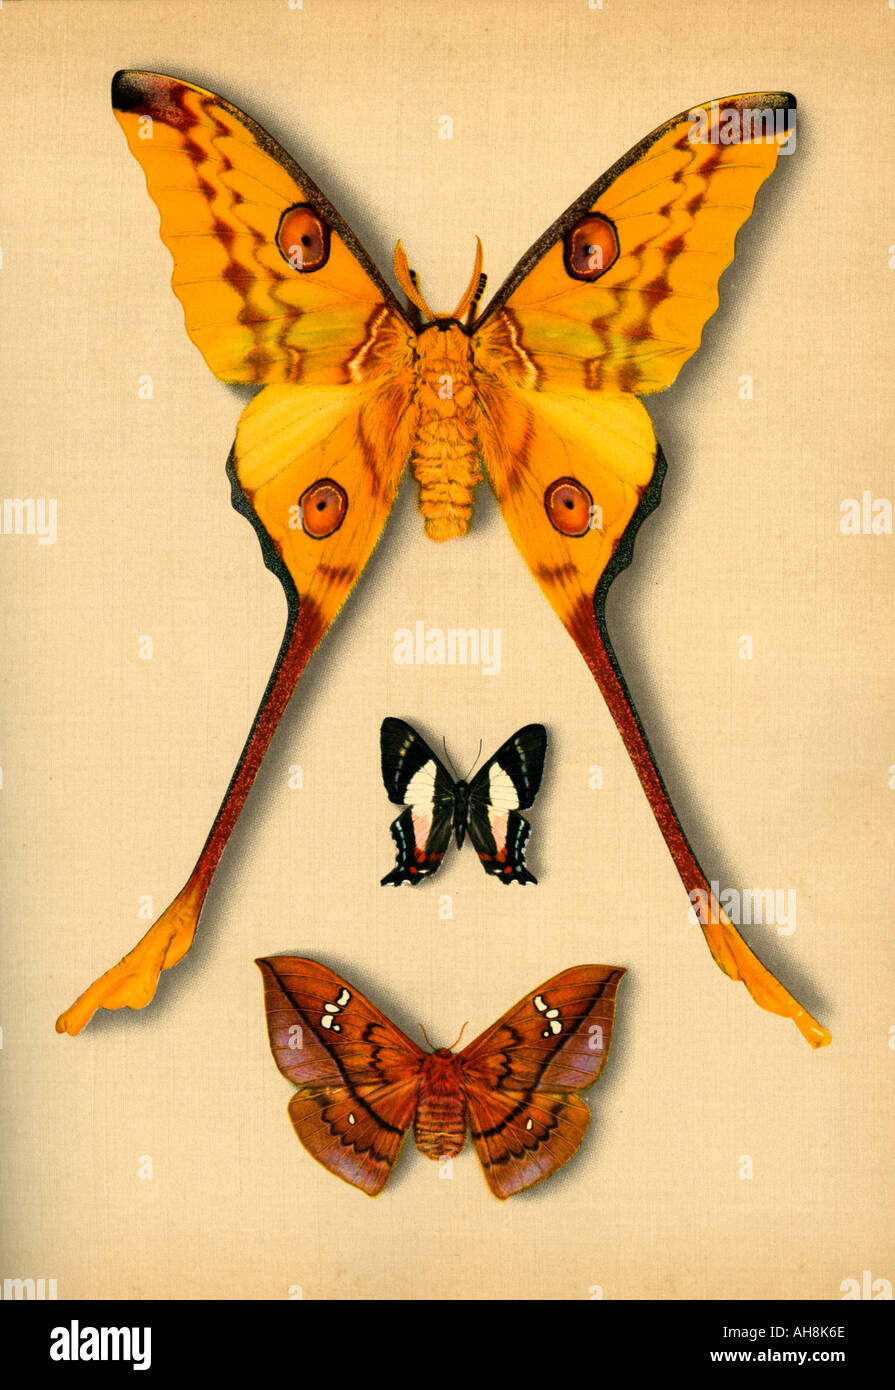 AAD71478 Three artistic colorful Golden moths mounted butterflies moths Stock Photo